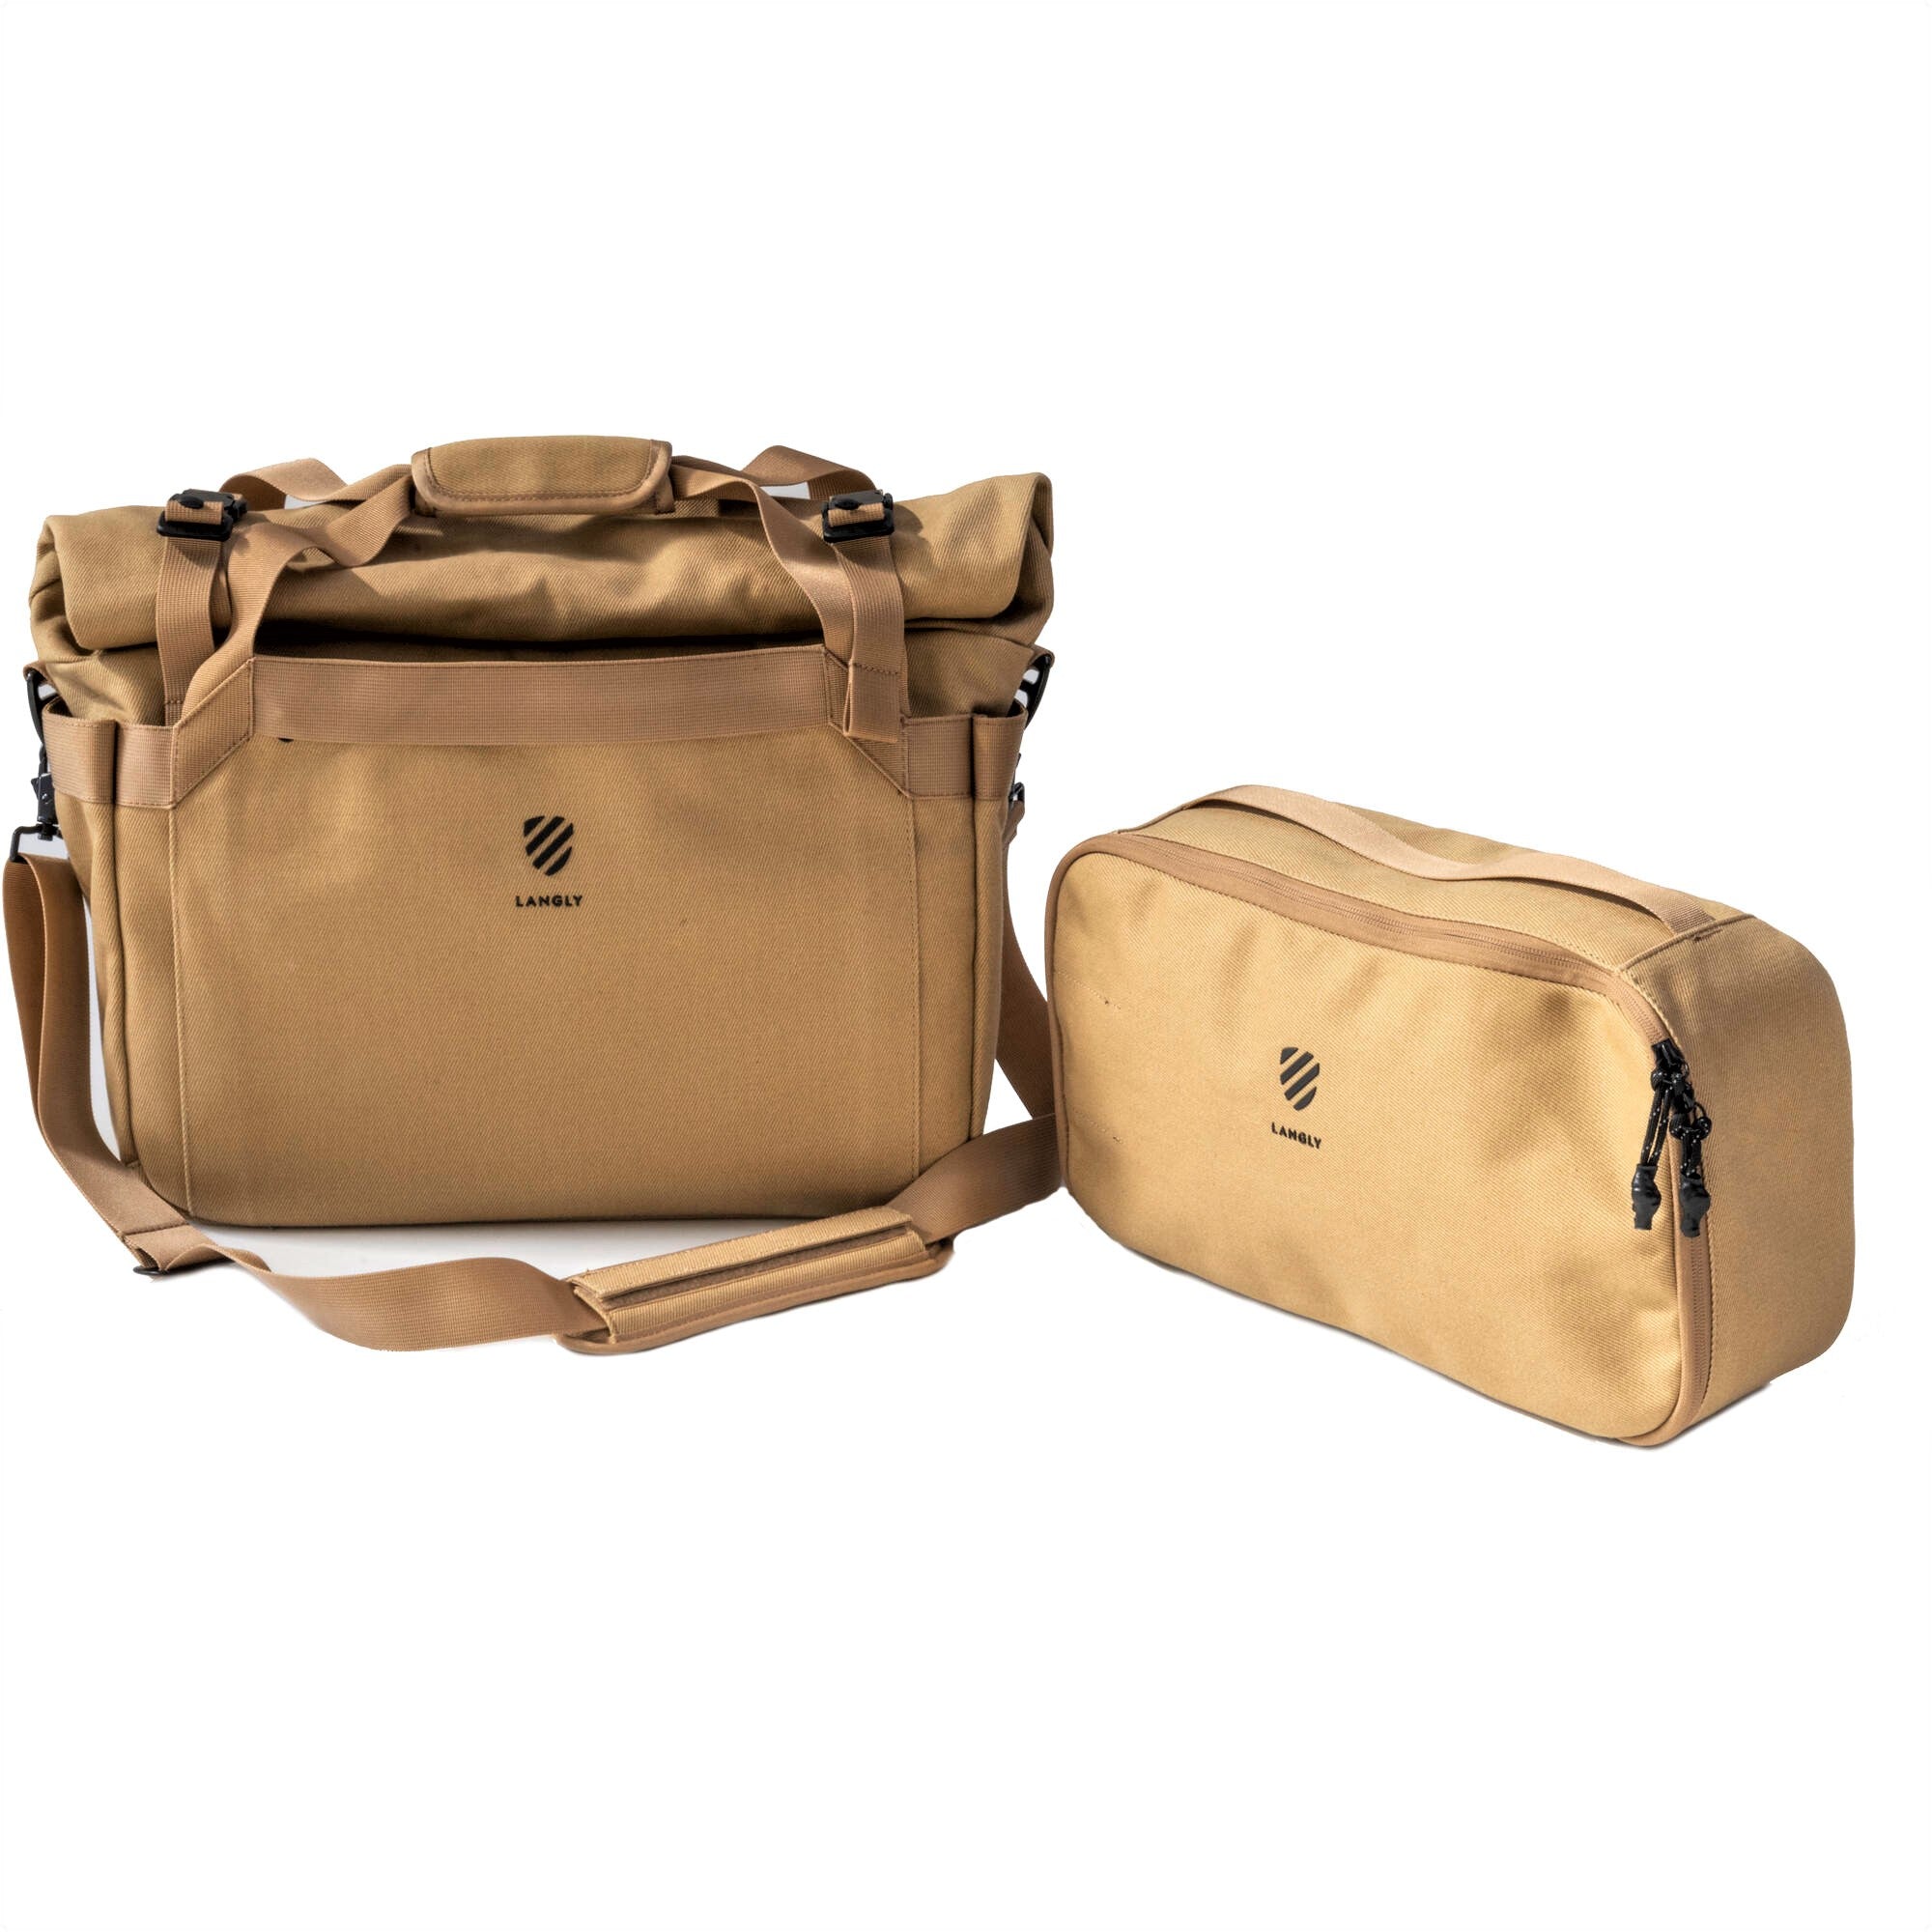 Langly Weekender Flight Bag with Camera Cube﻿ (Sand)